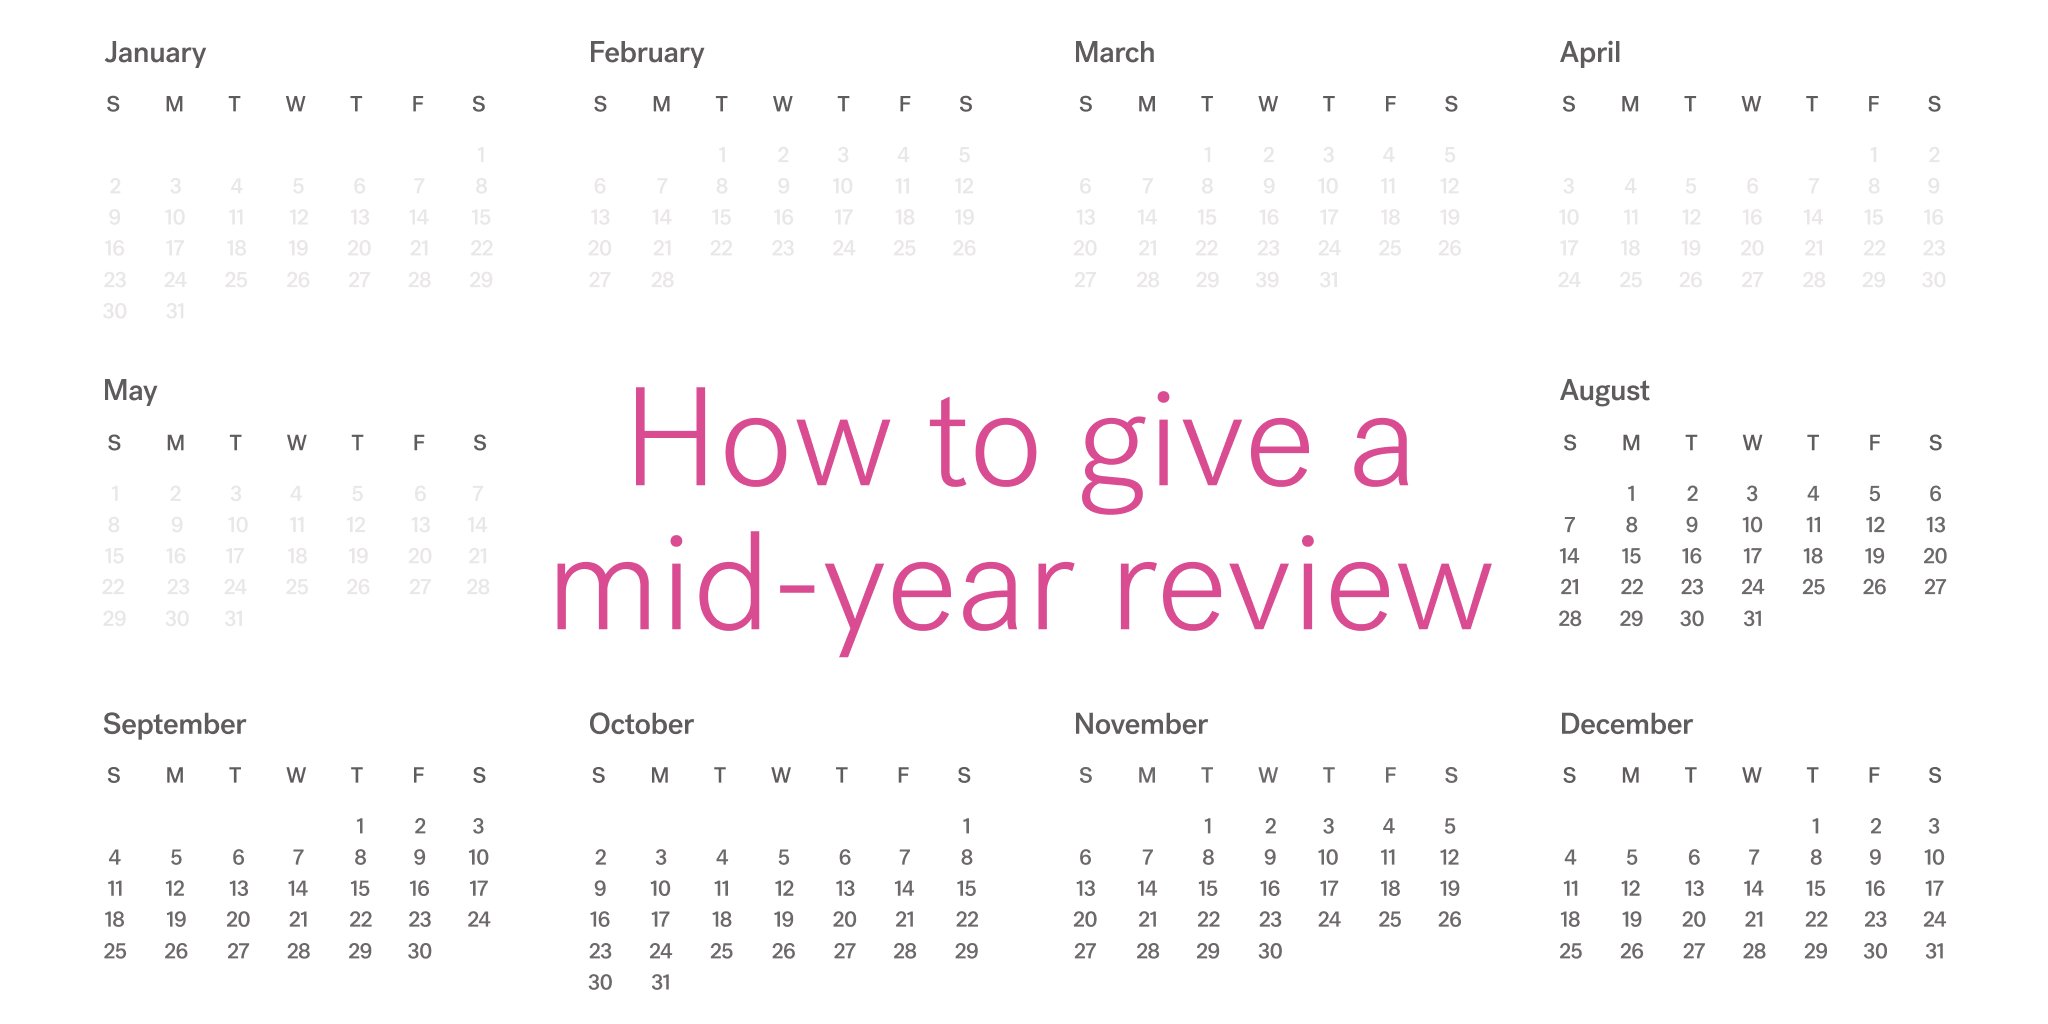 How to give a mid-year review 